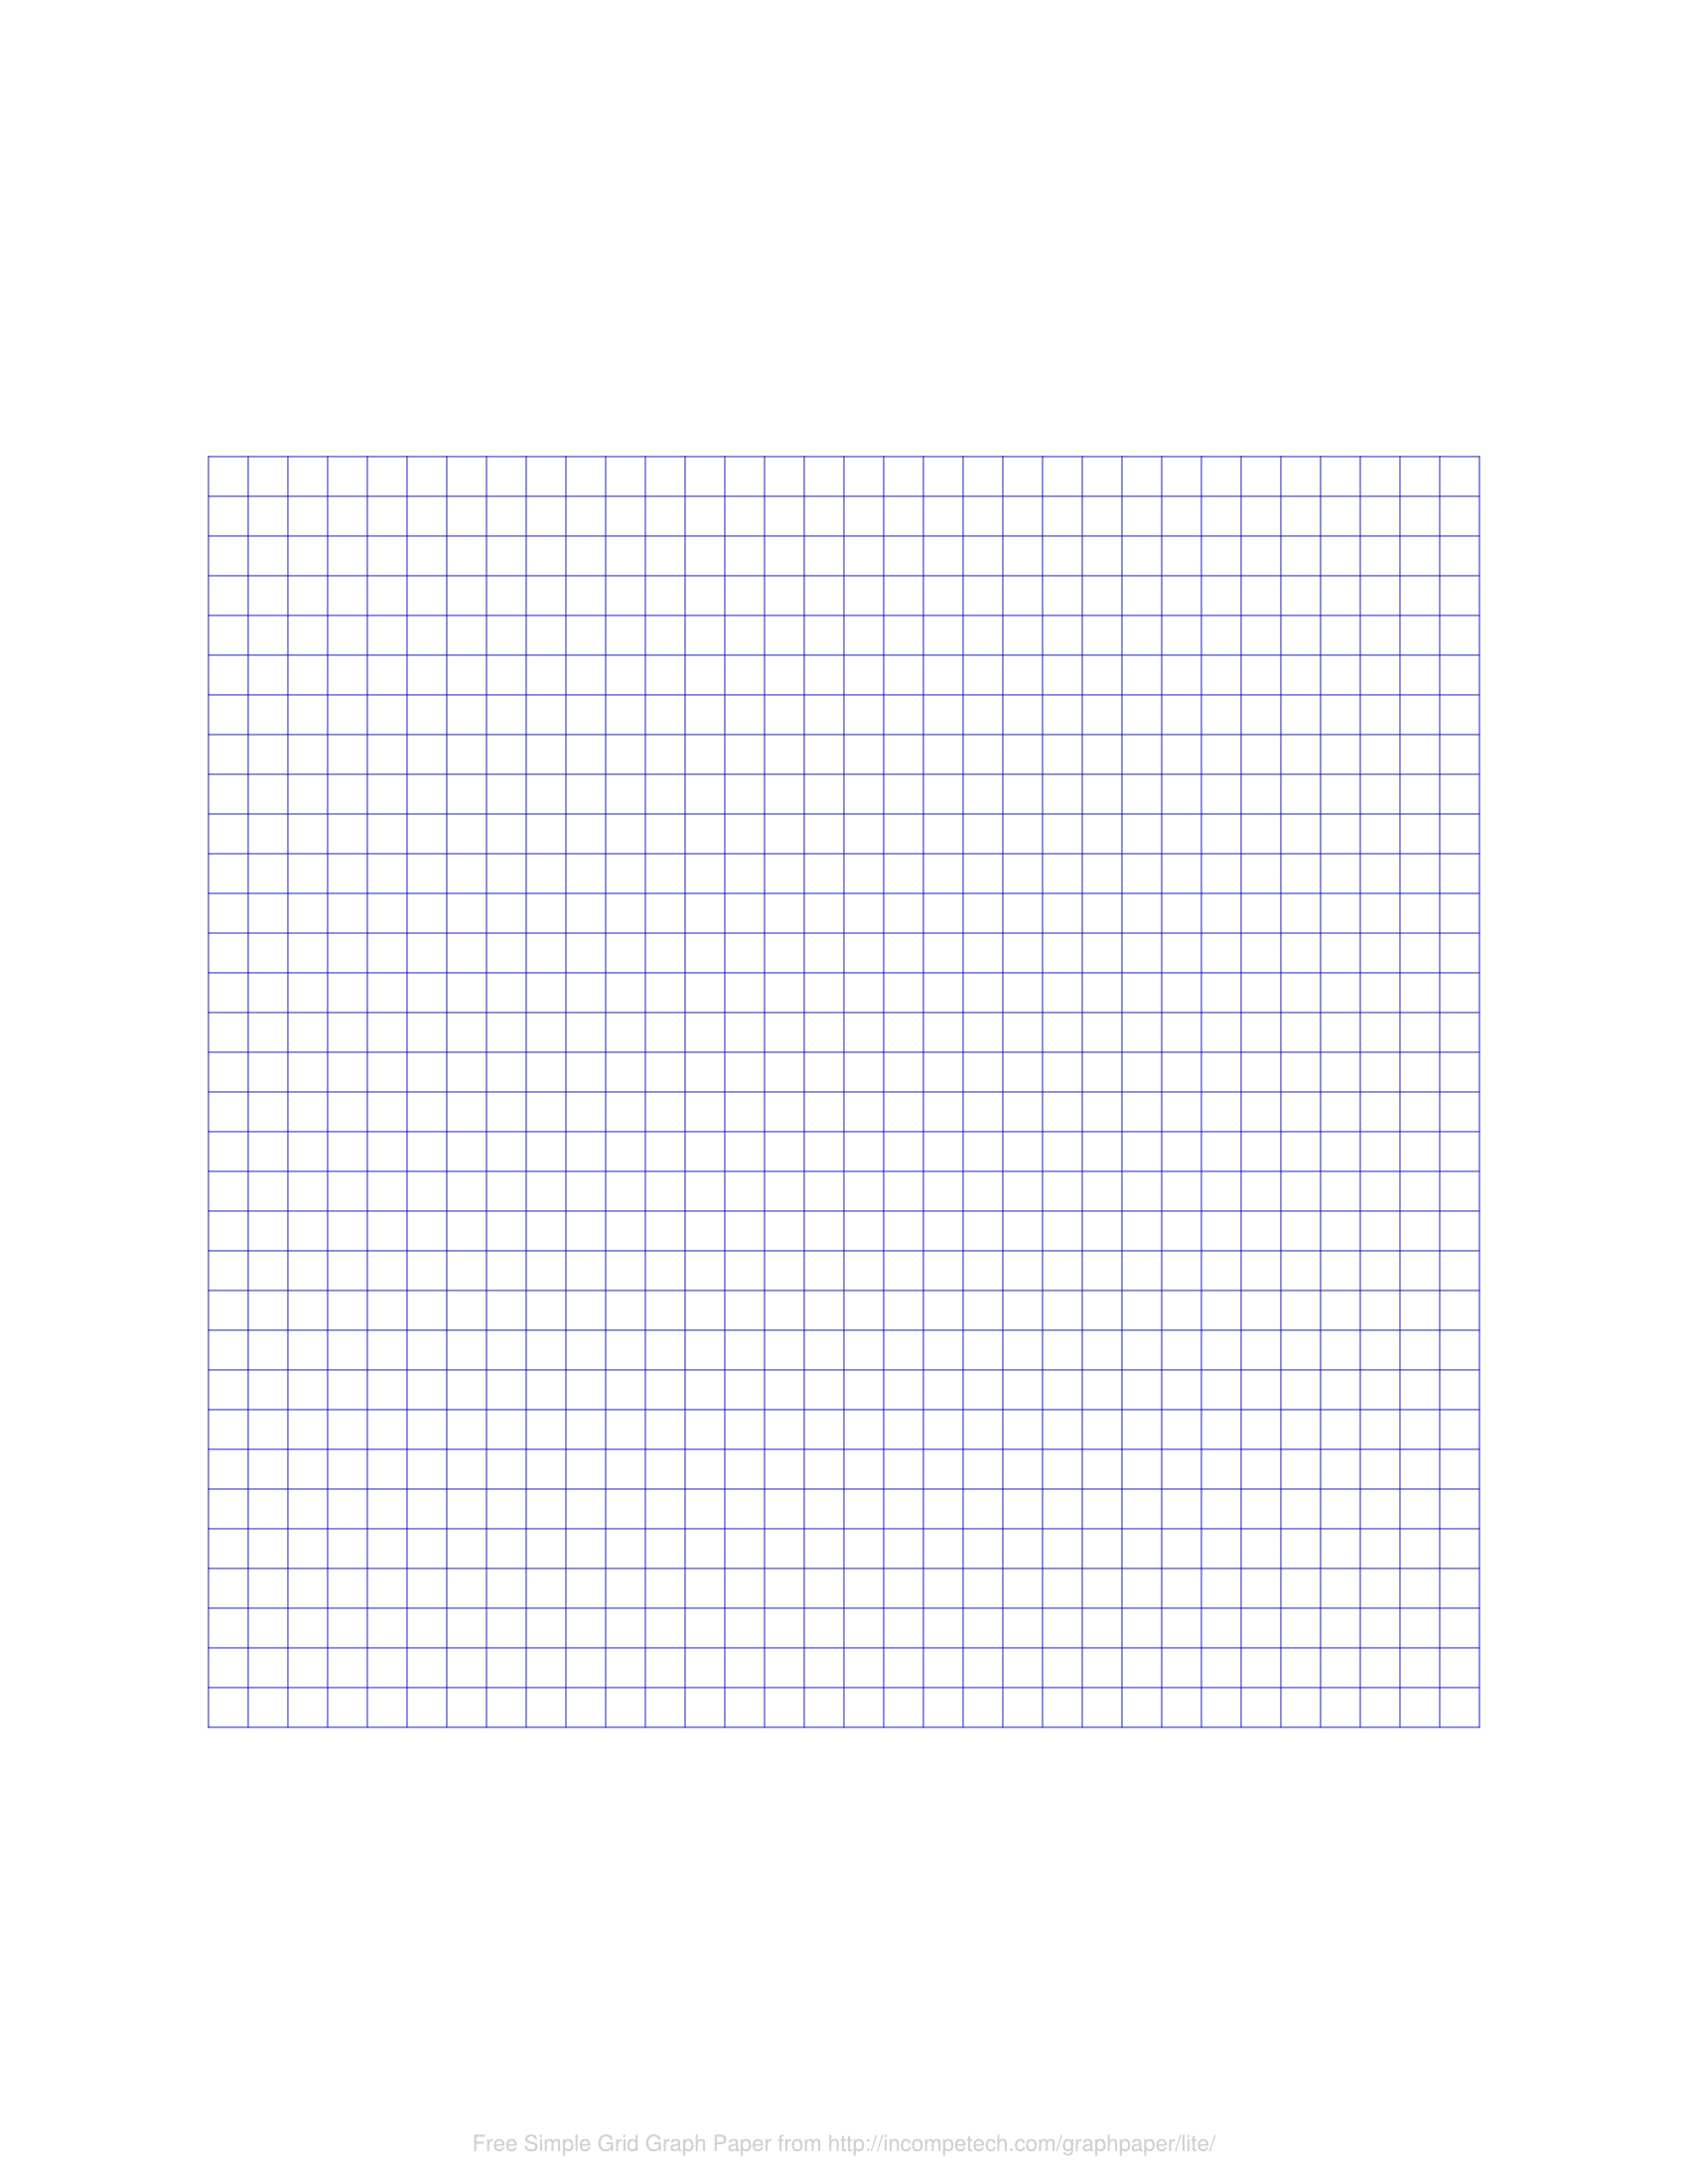 Free Online Graph Paper / Simple Grid Throughout Blank Picture Graph Template